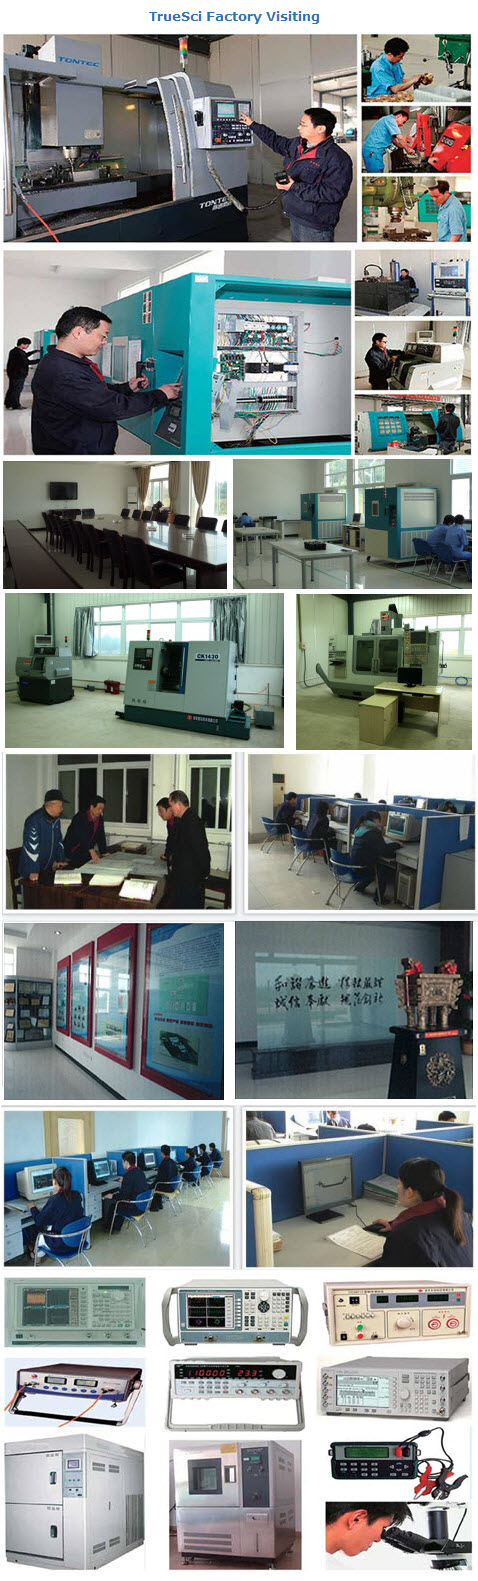 China TrueSci Factory and Manufacturing Facilities